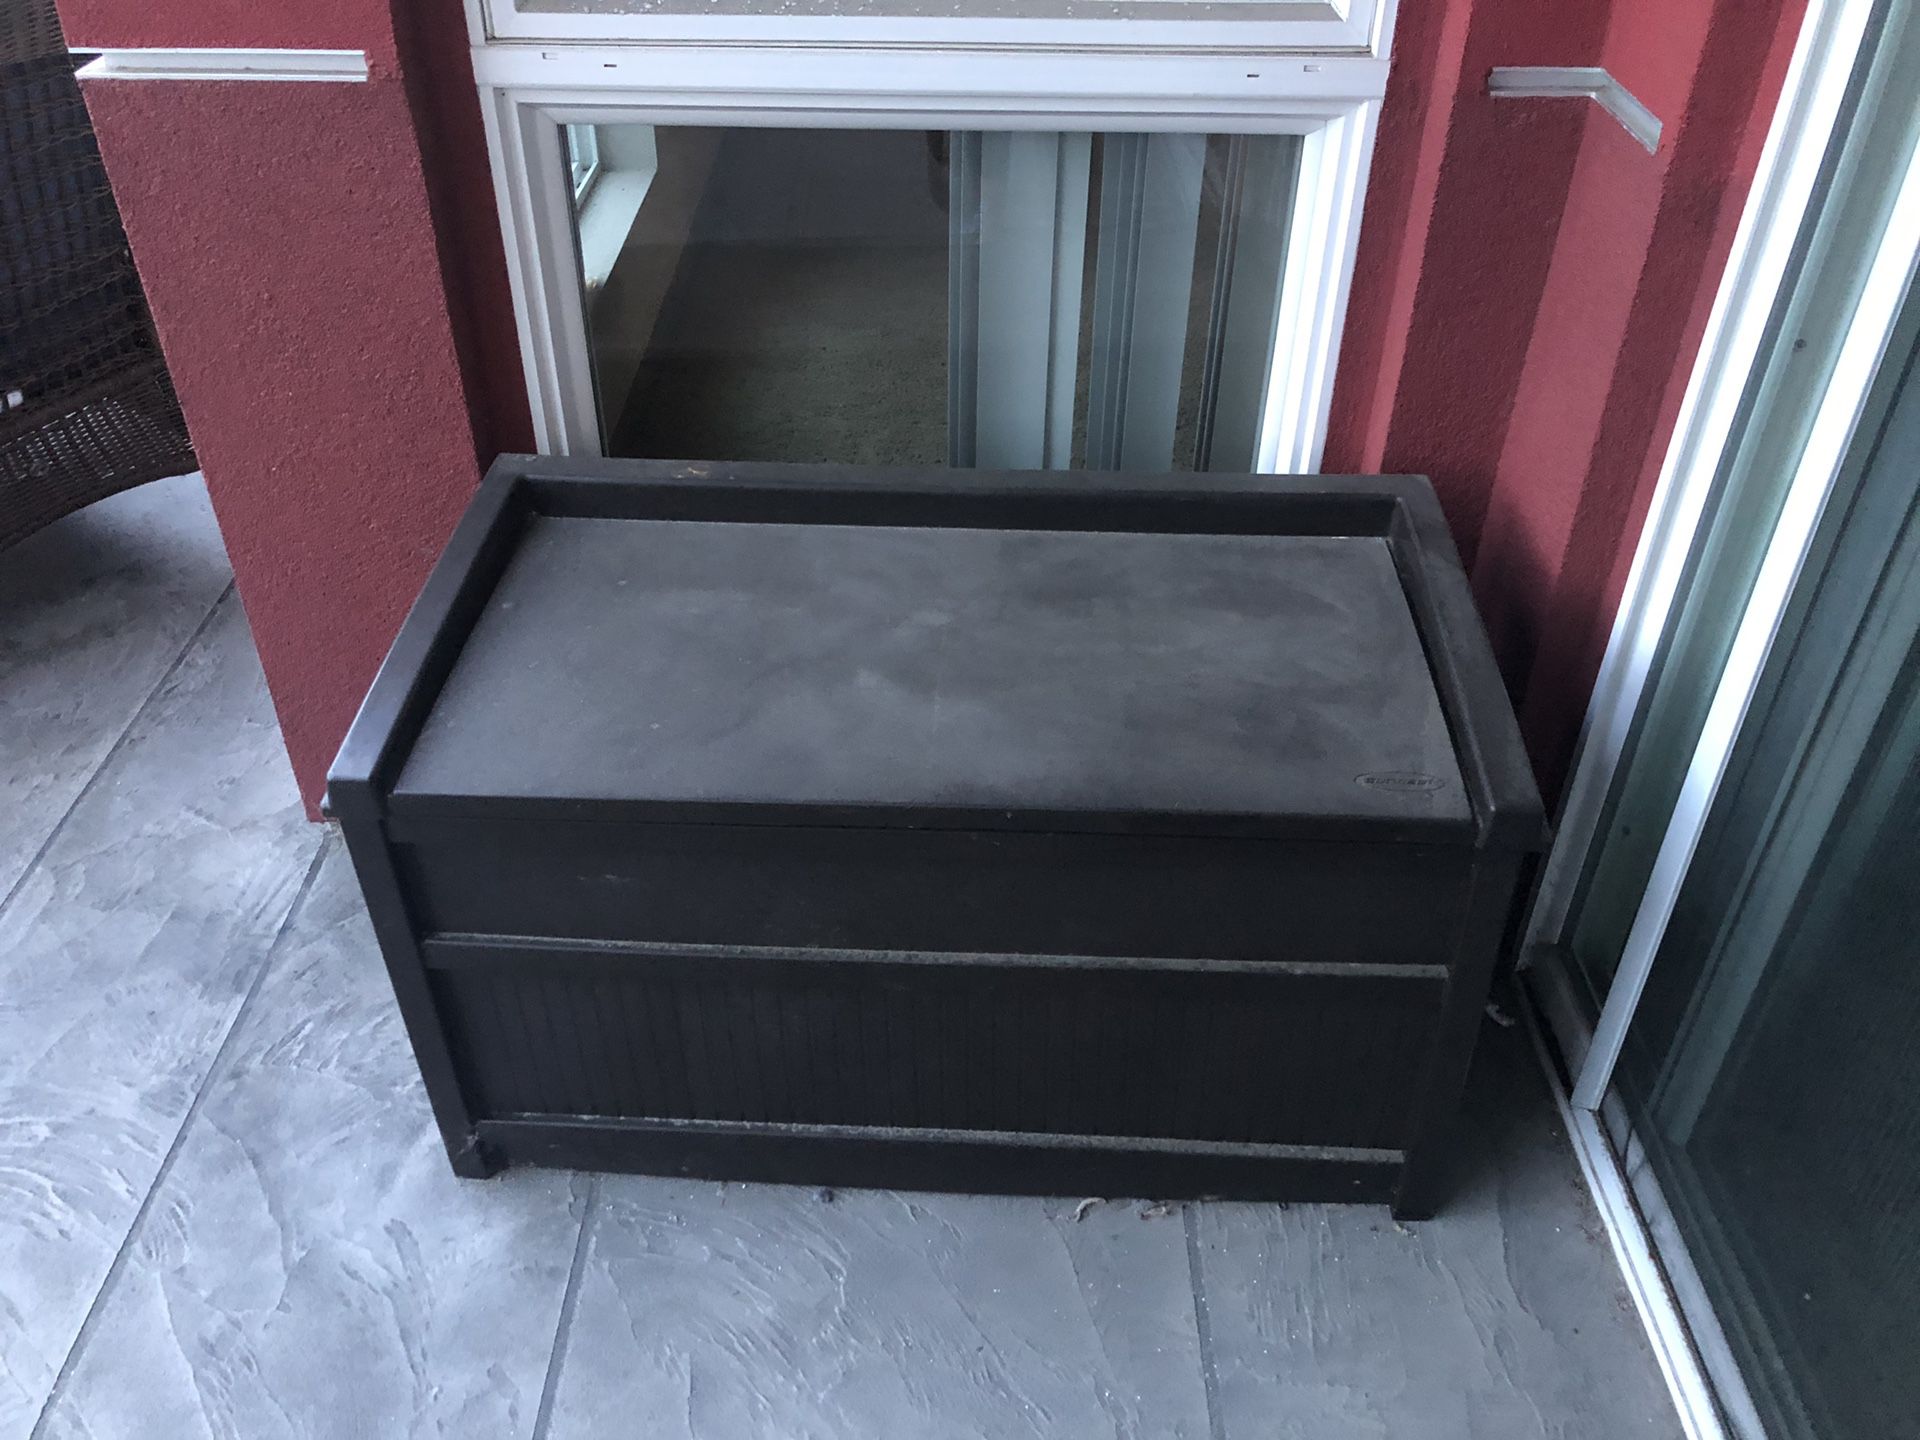 Outdoor storage box from Home Depot